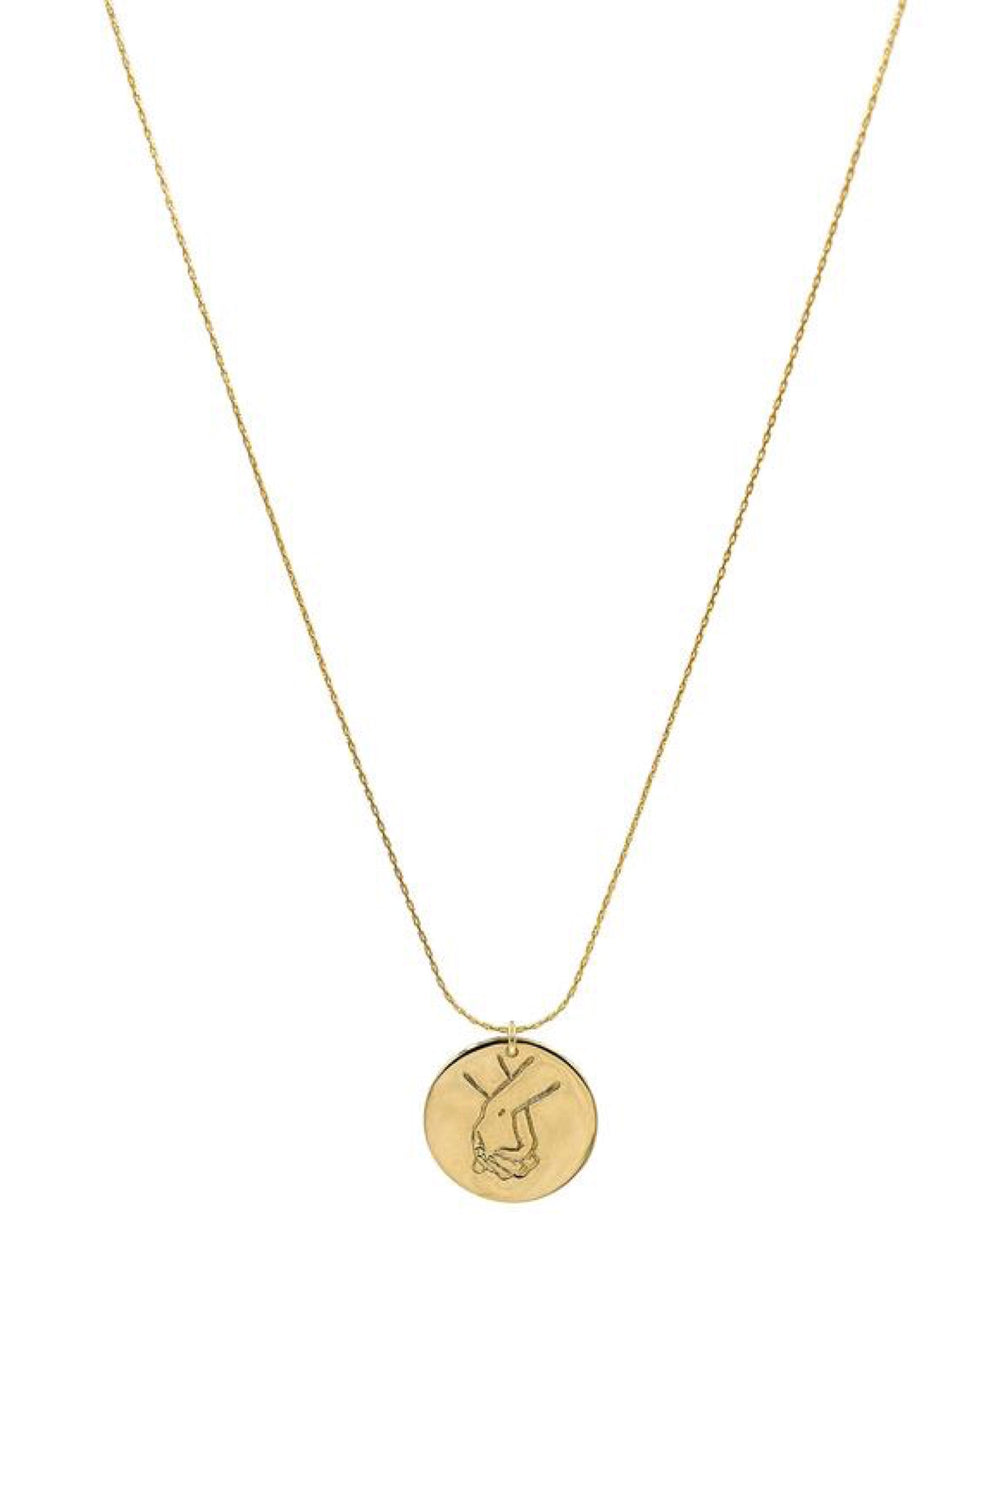 Gold Holding Hands Coin Necklace